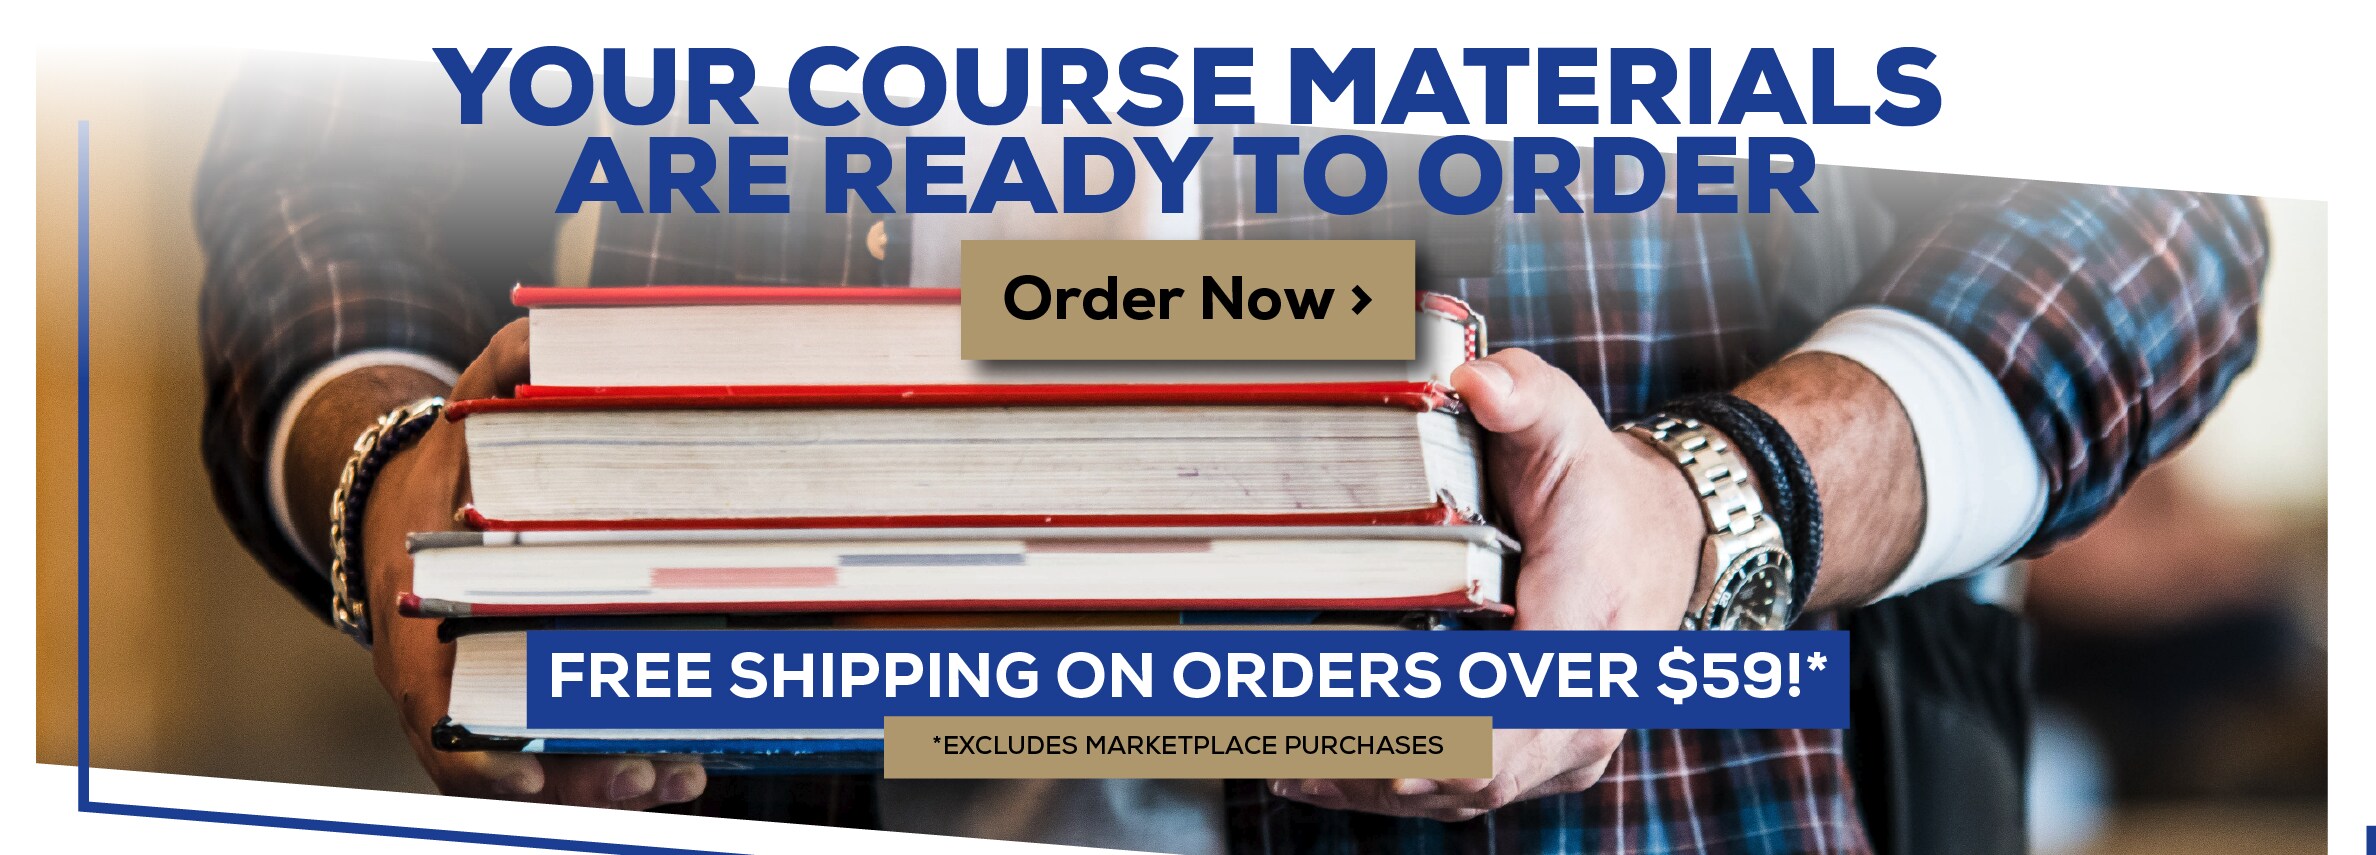 Your Course Materials are Ready to Order. Order Now. Free shipping on orders over $59! *Excludes marketplace purchases.